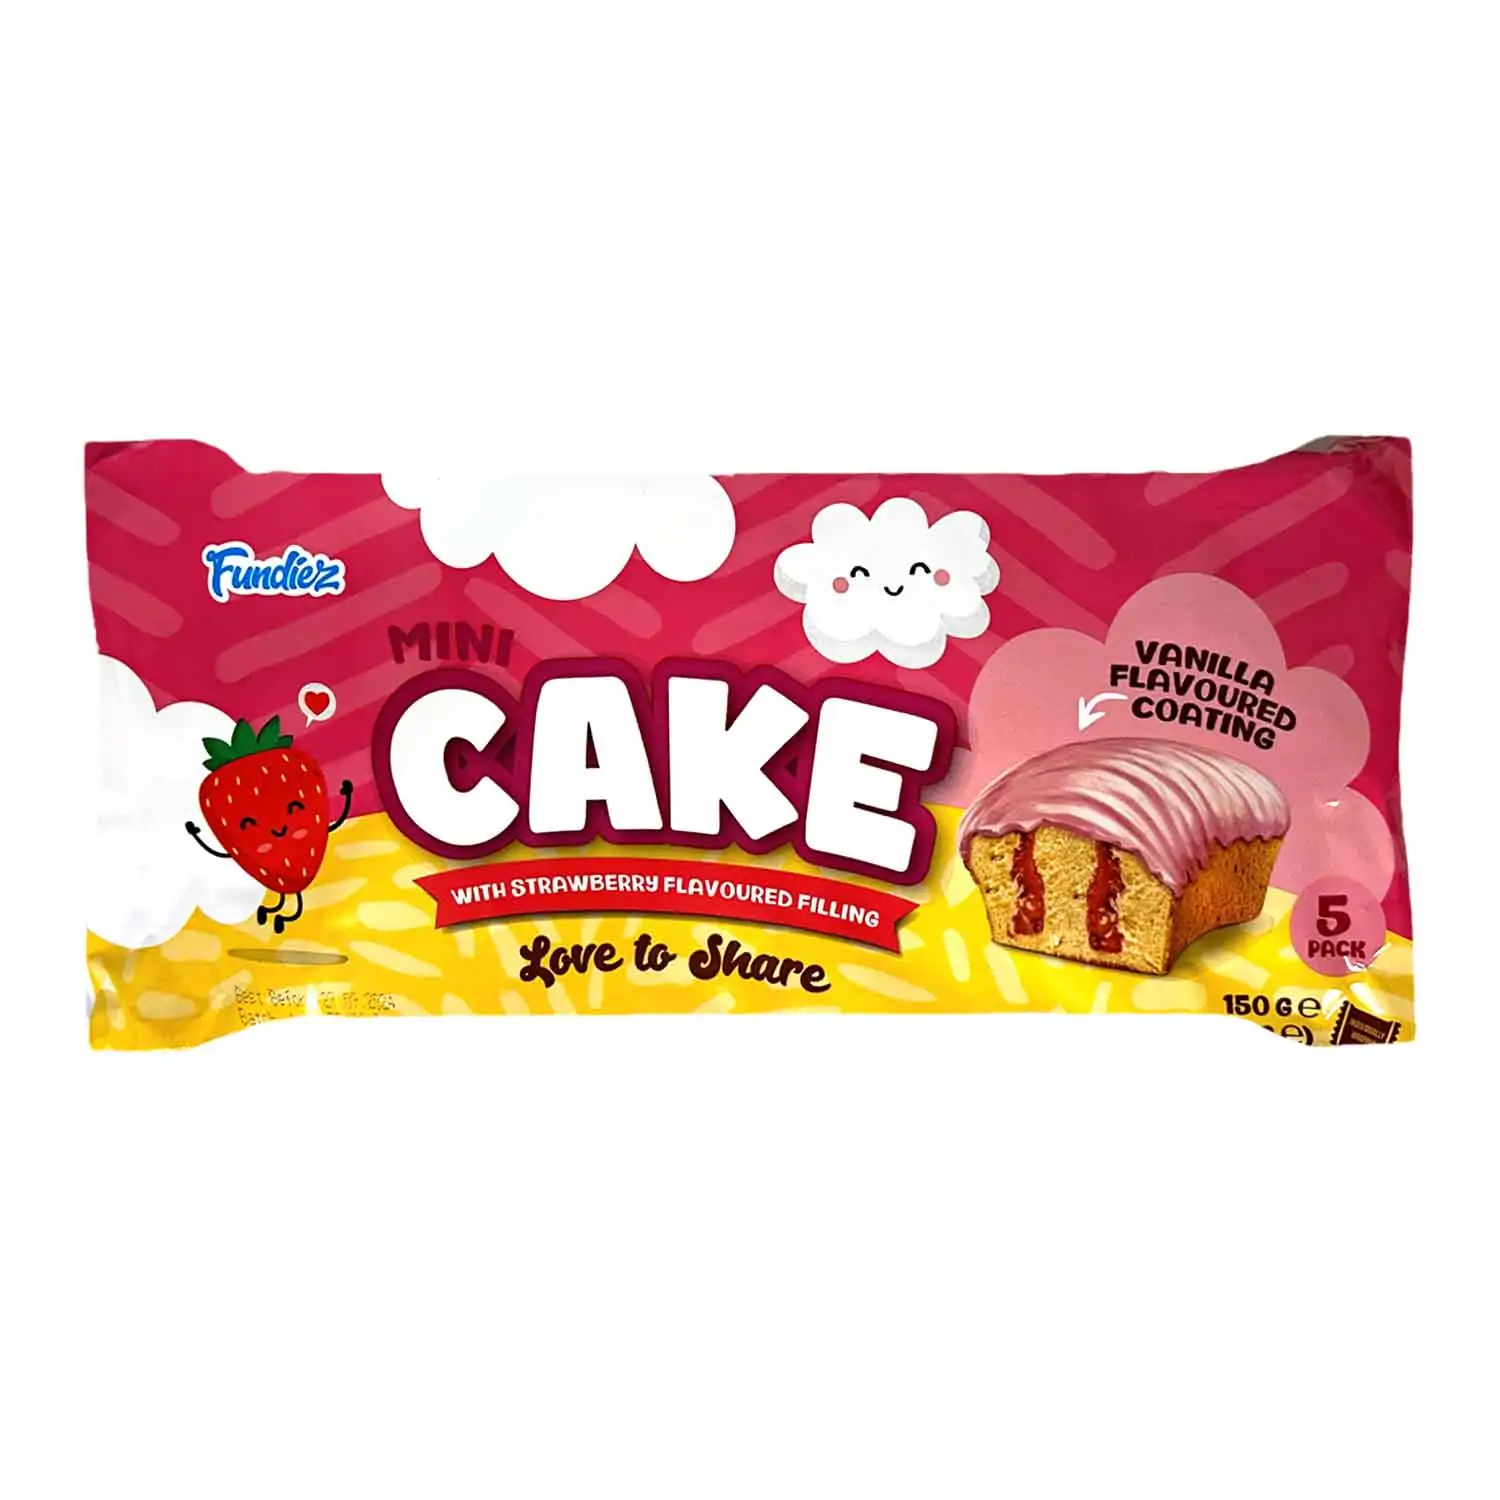 Fundiez mini cake fraise 5x30g - Buy at Real Tobacco